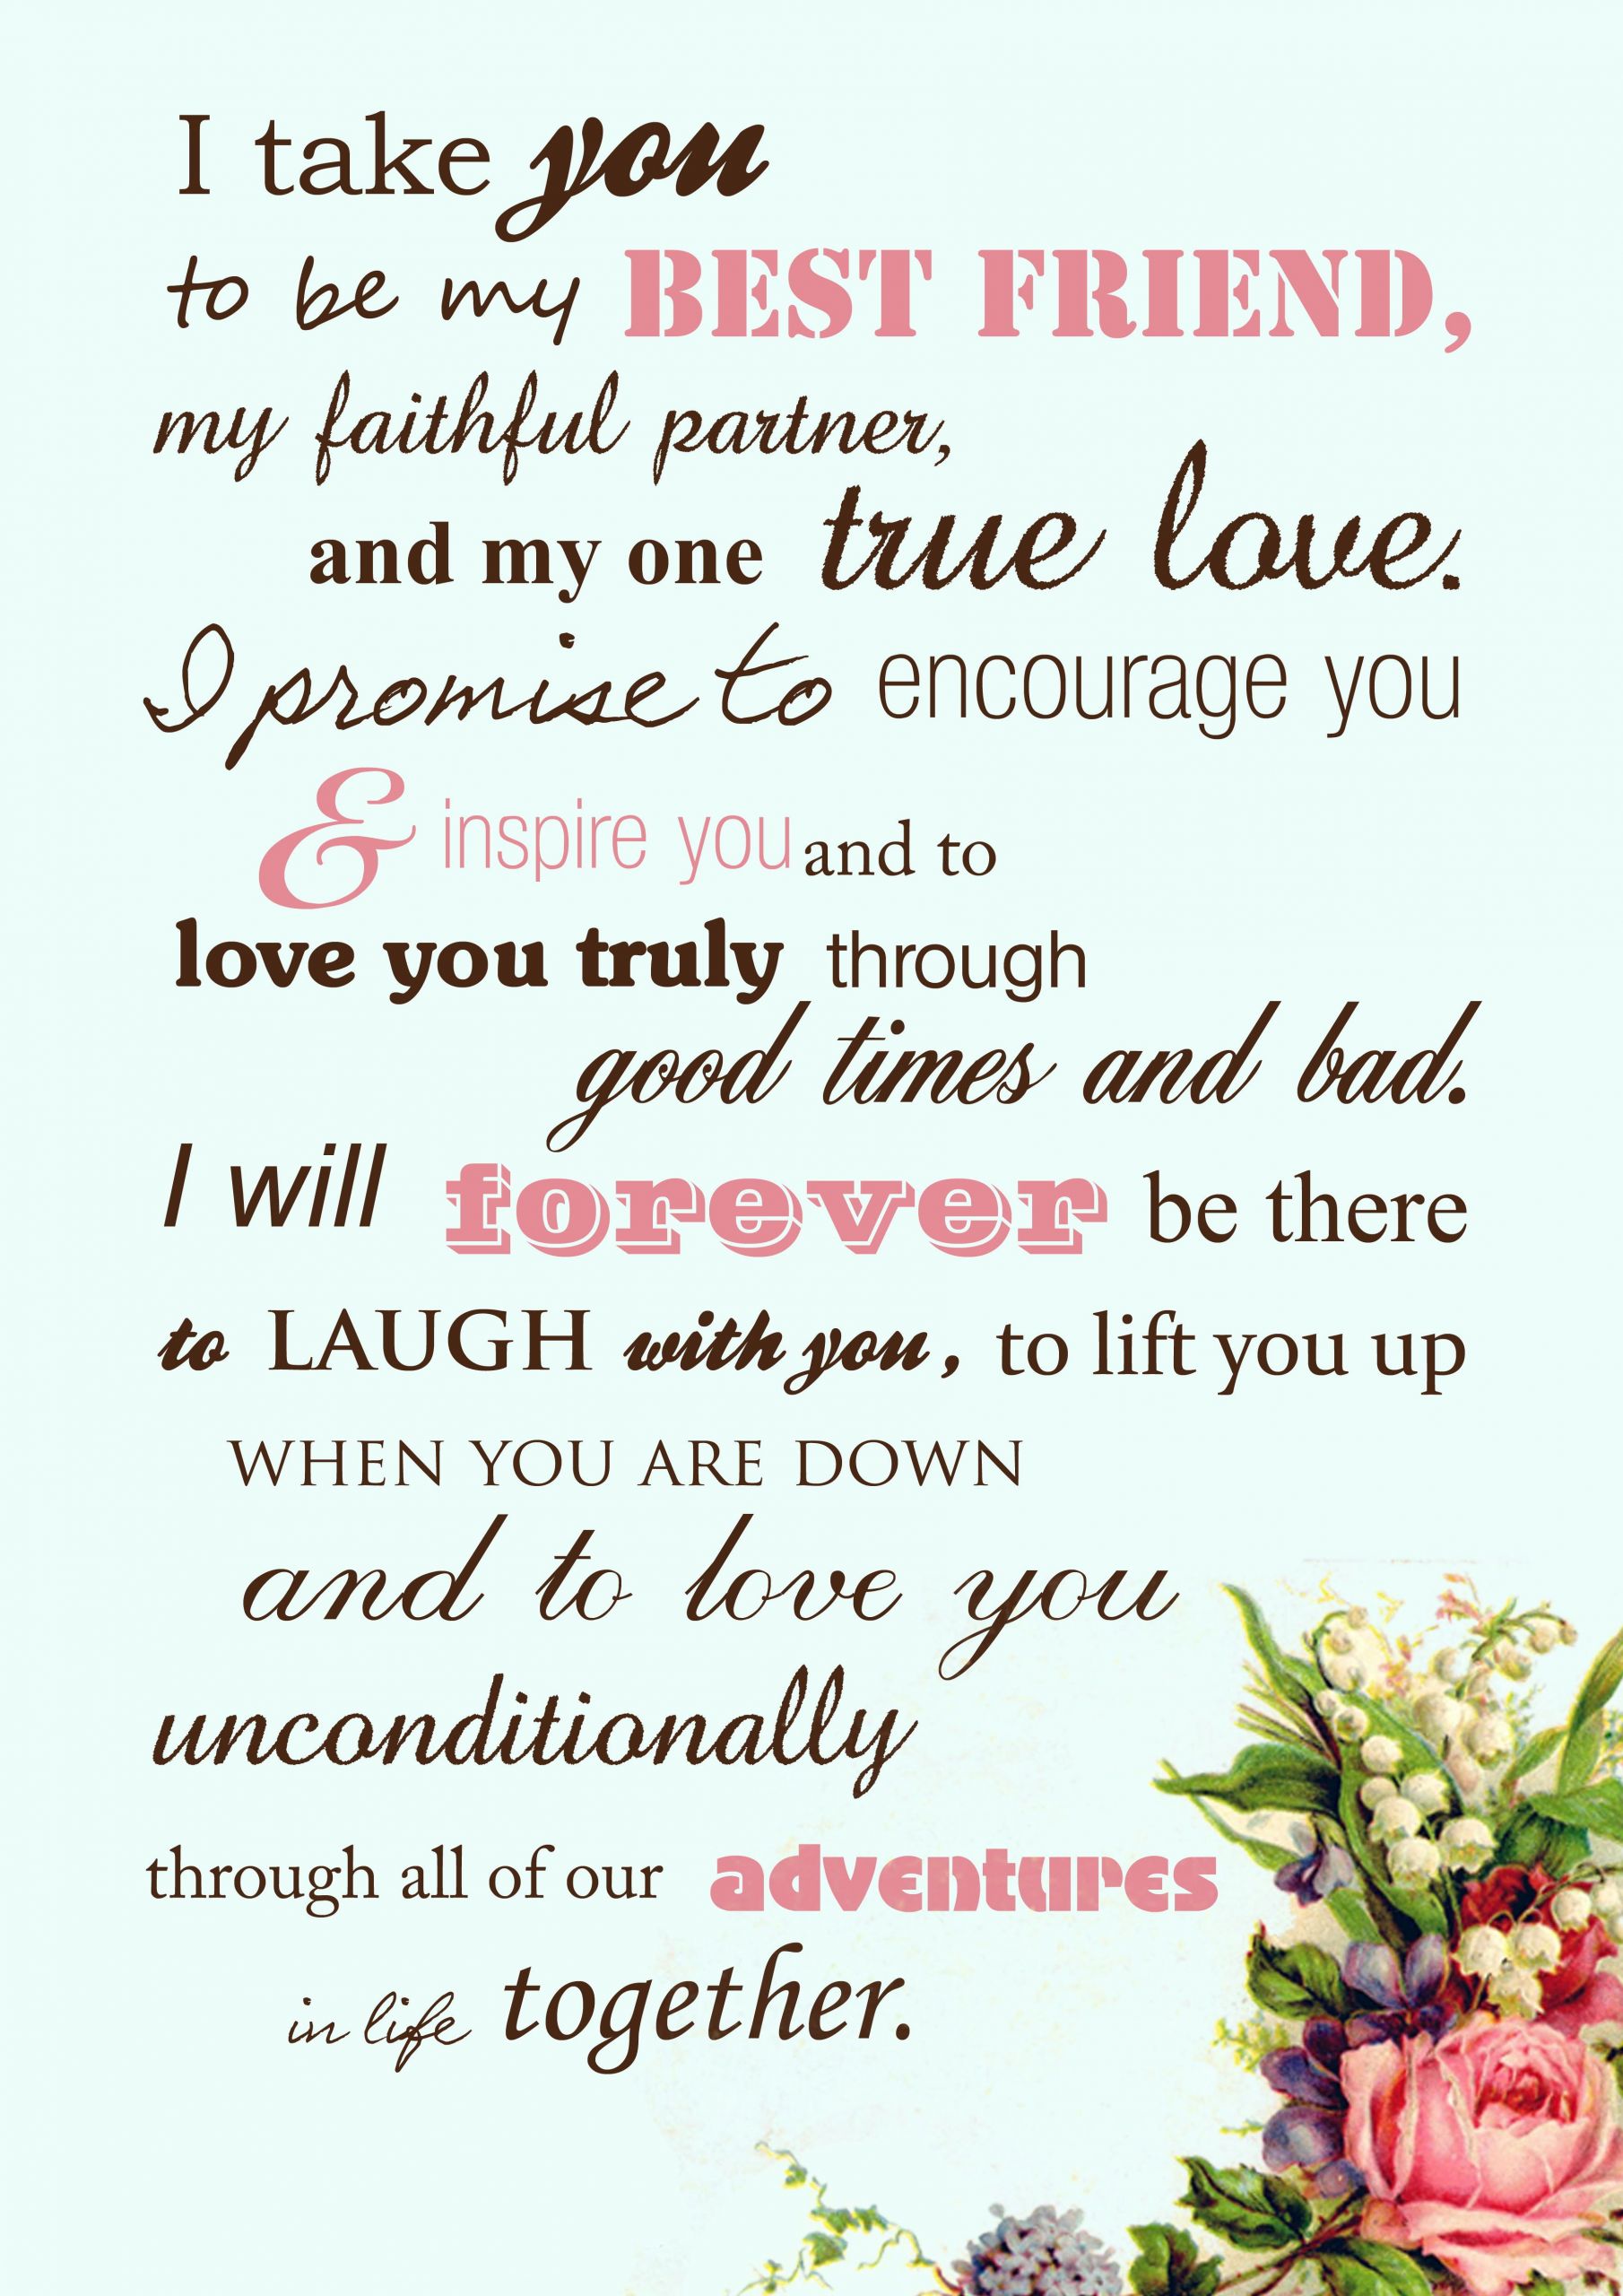 Short Simple Wedding Vows
 Beautiful wedding vows instead of the traditional by the